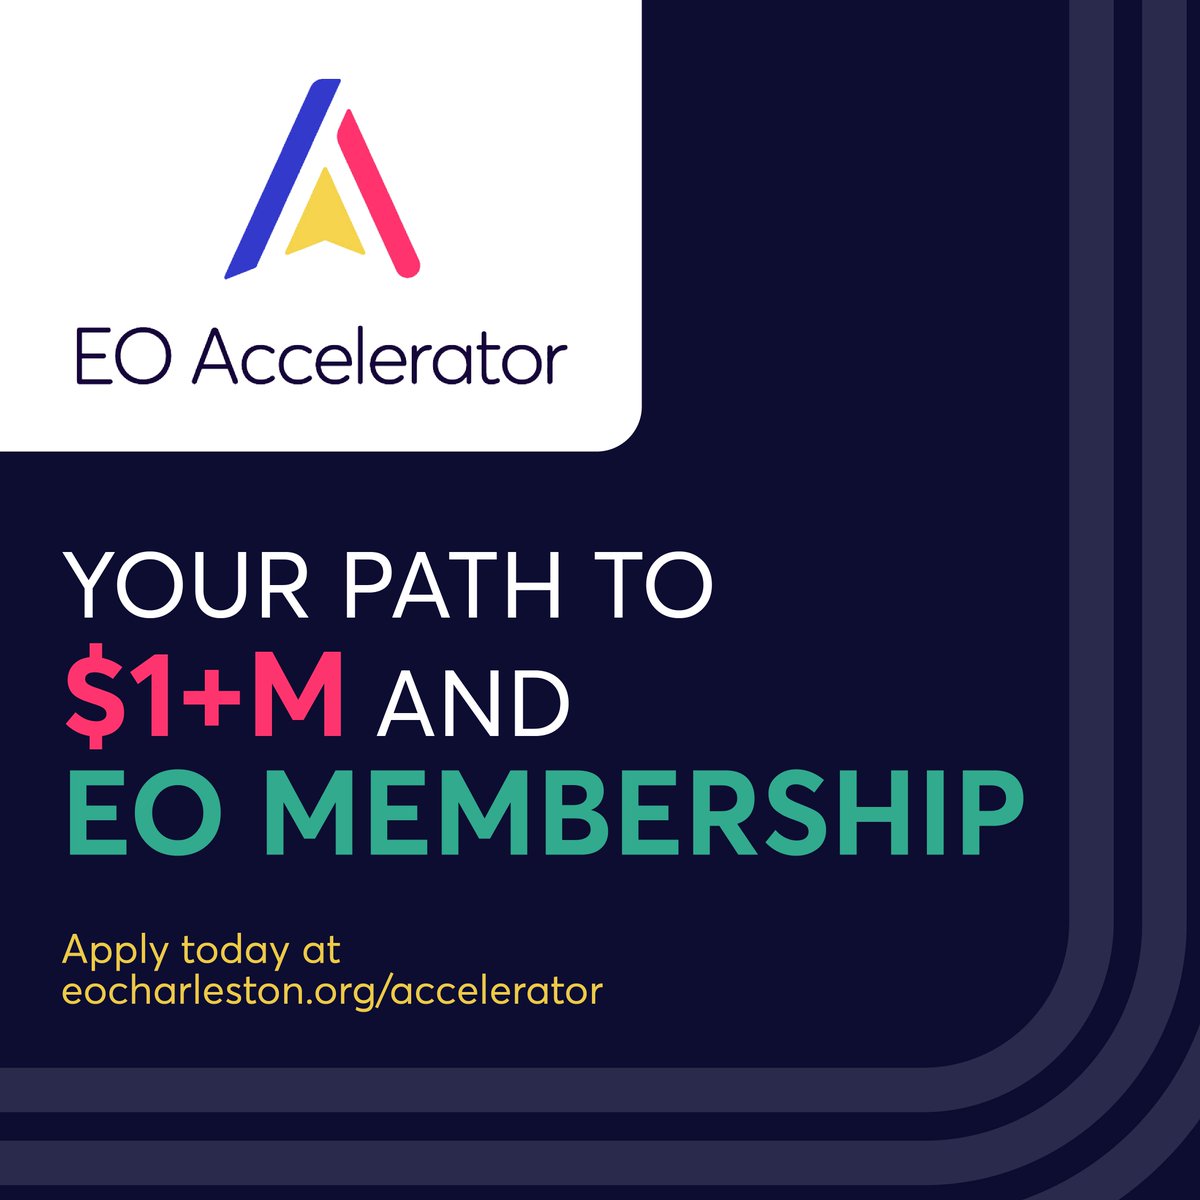 Find your path to $1+ million! ✅ EO Accelerator helps entrepreneurs push past roadblocks to fast-track success and EO membership. Apply today: bit.ly/3mGL5PR #EOA #EOAccelerator